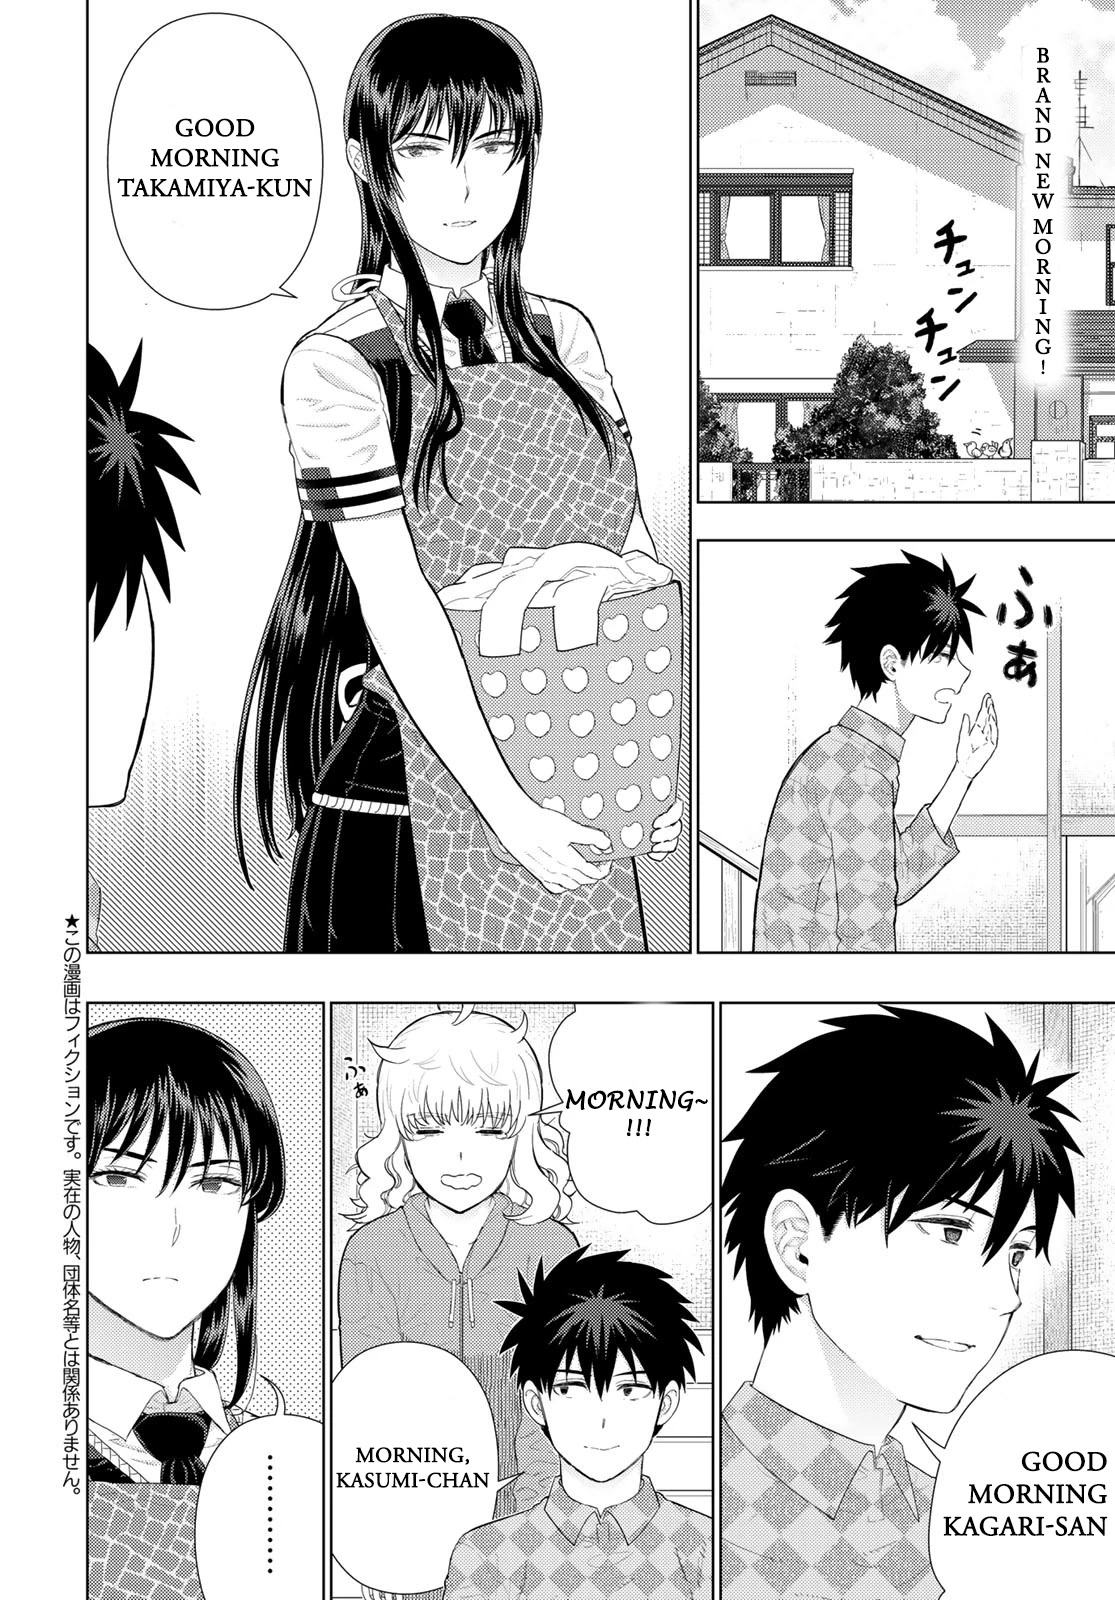 Witchcraft Works - Page 2